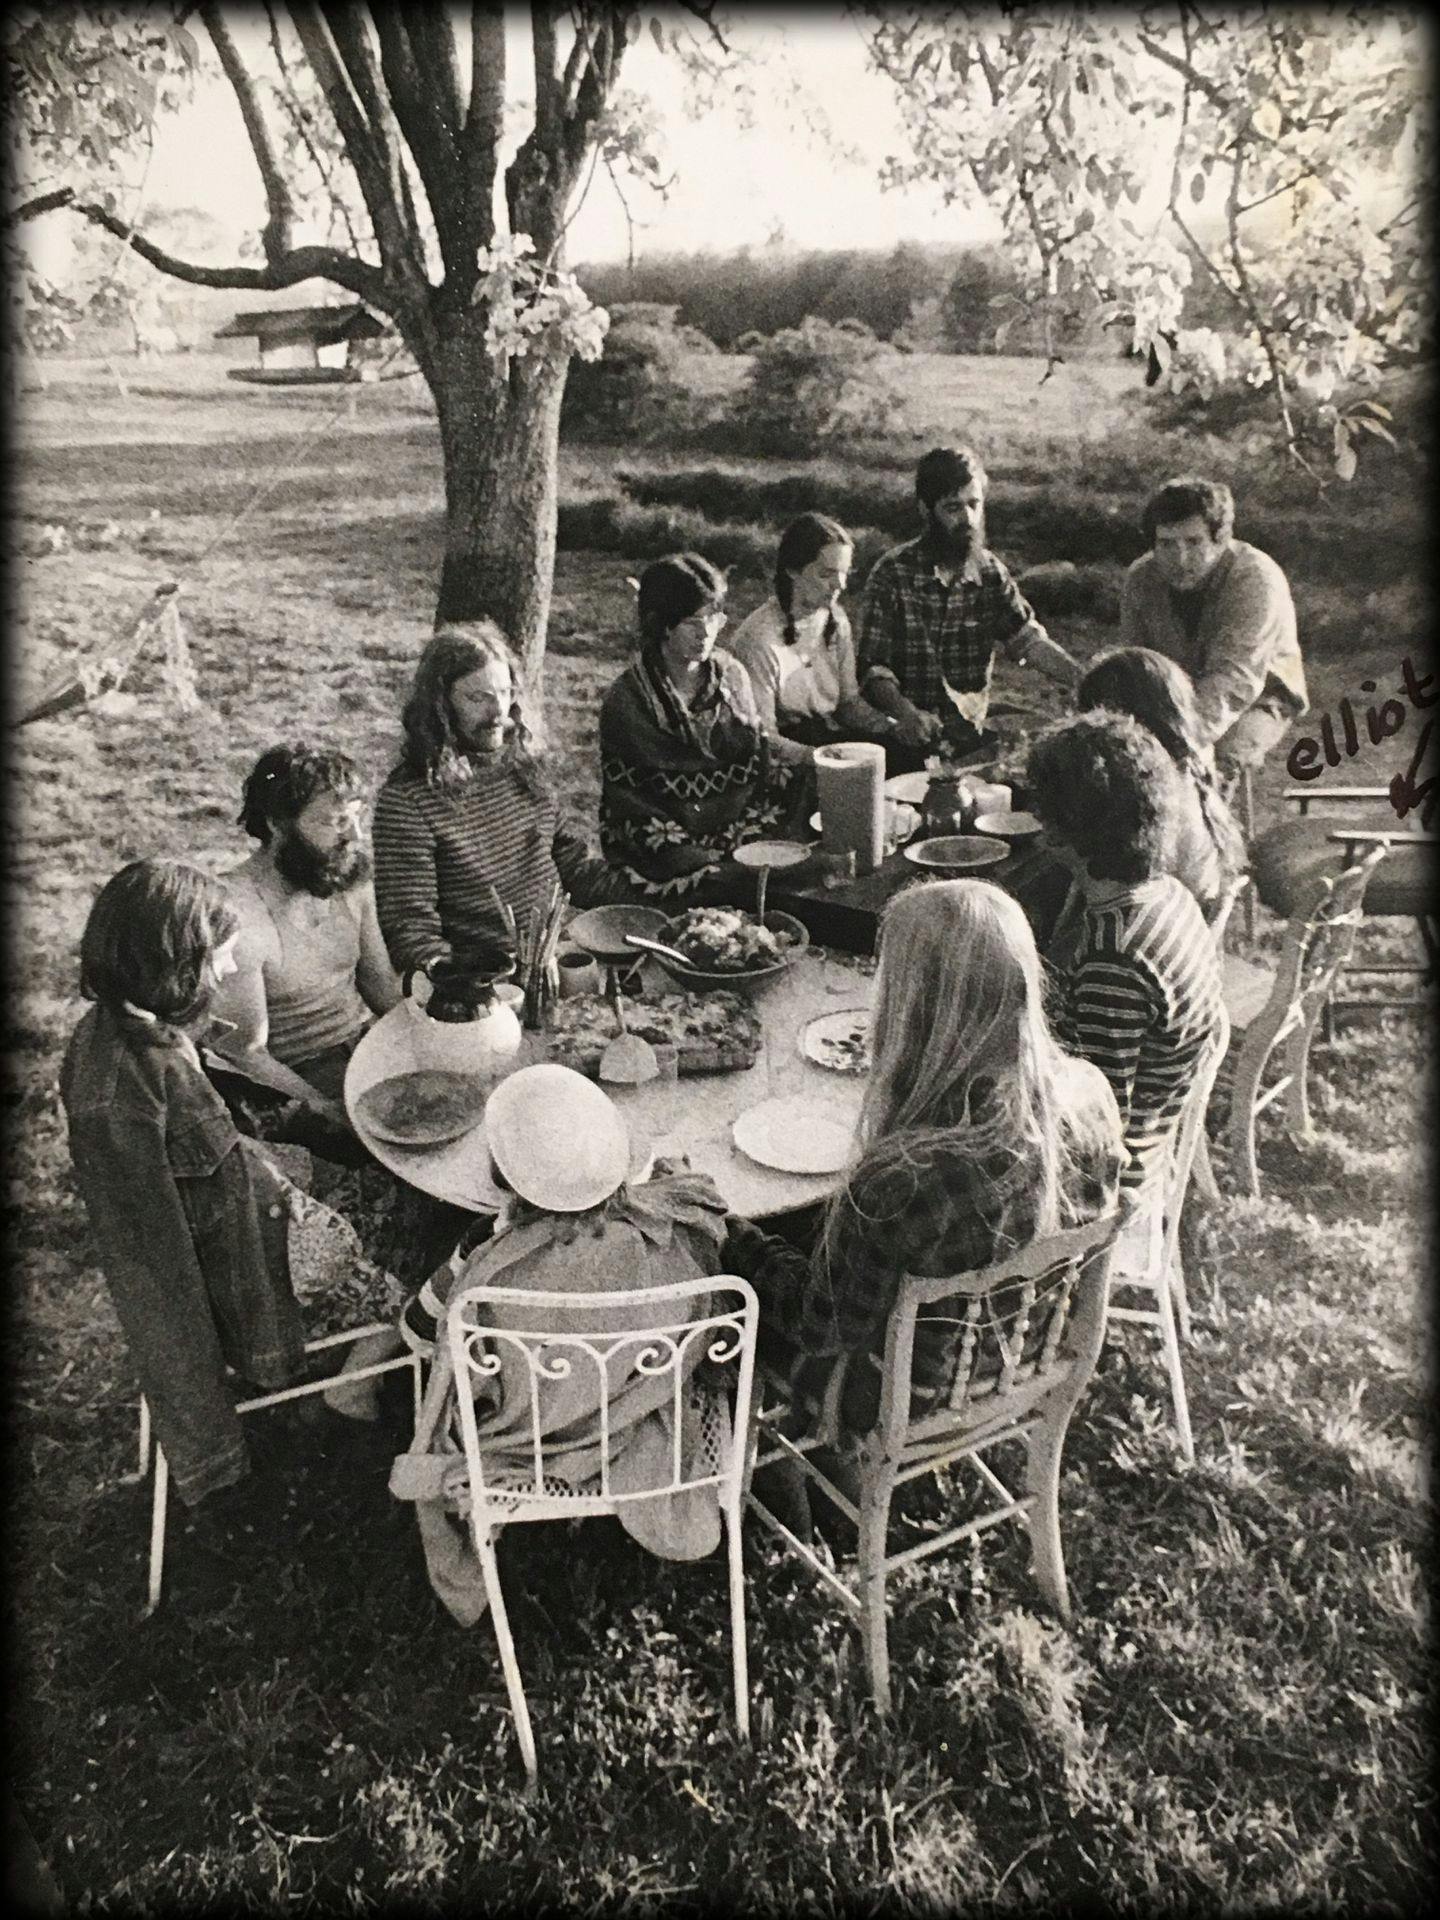 Members of the commune at Tree Frog Farm in Vermont saying grace before a meal